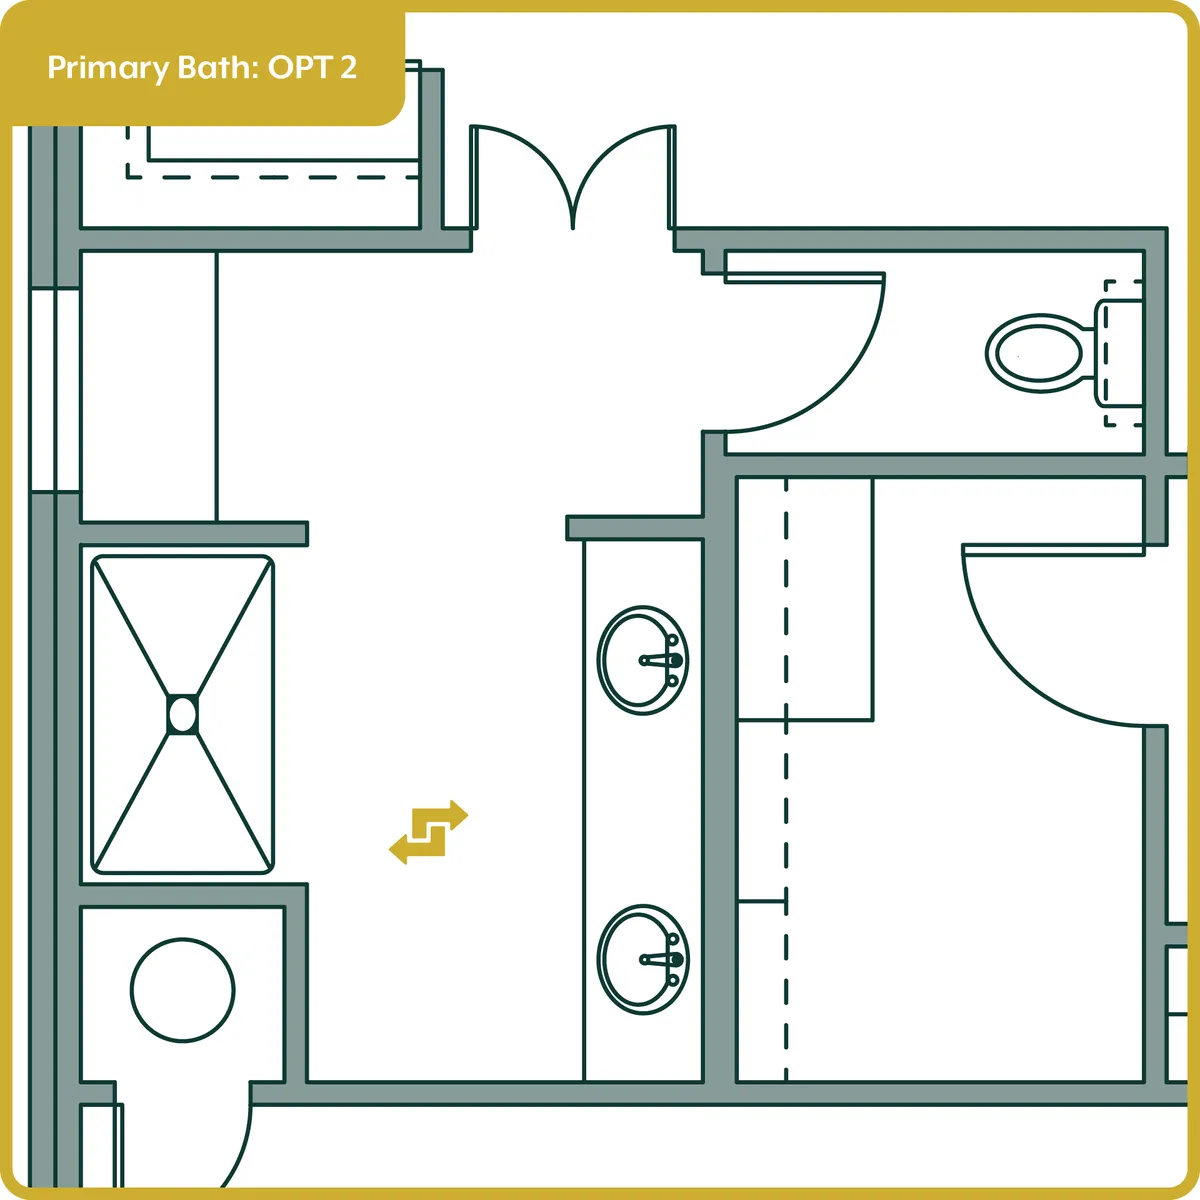 Lawrence. Lawrence Floor Plan - Primary Bath: OPT 2